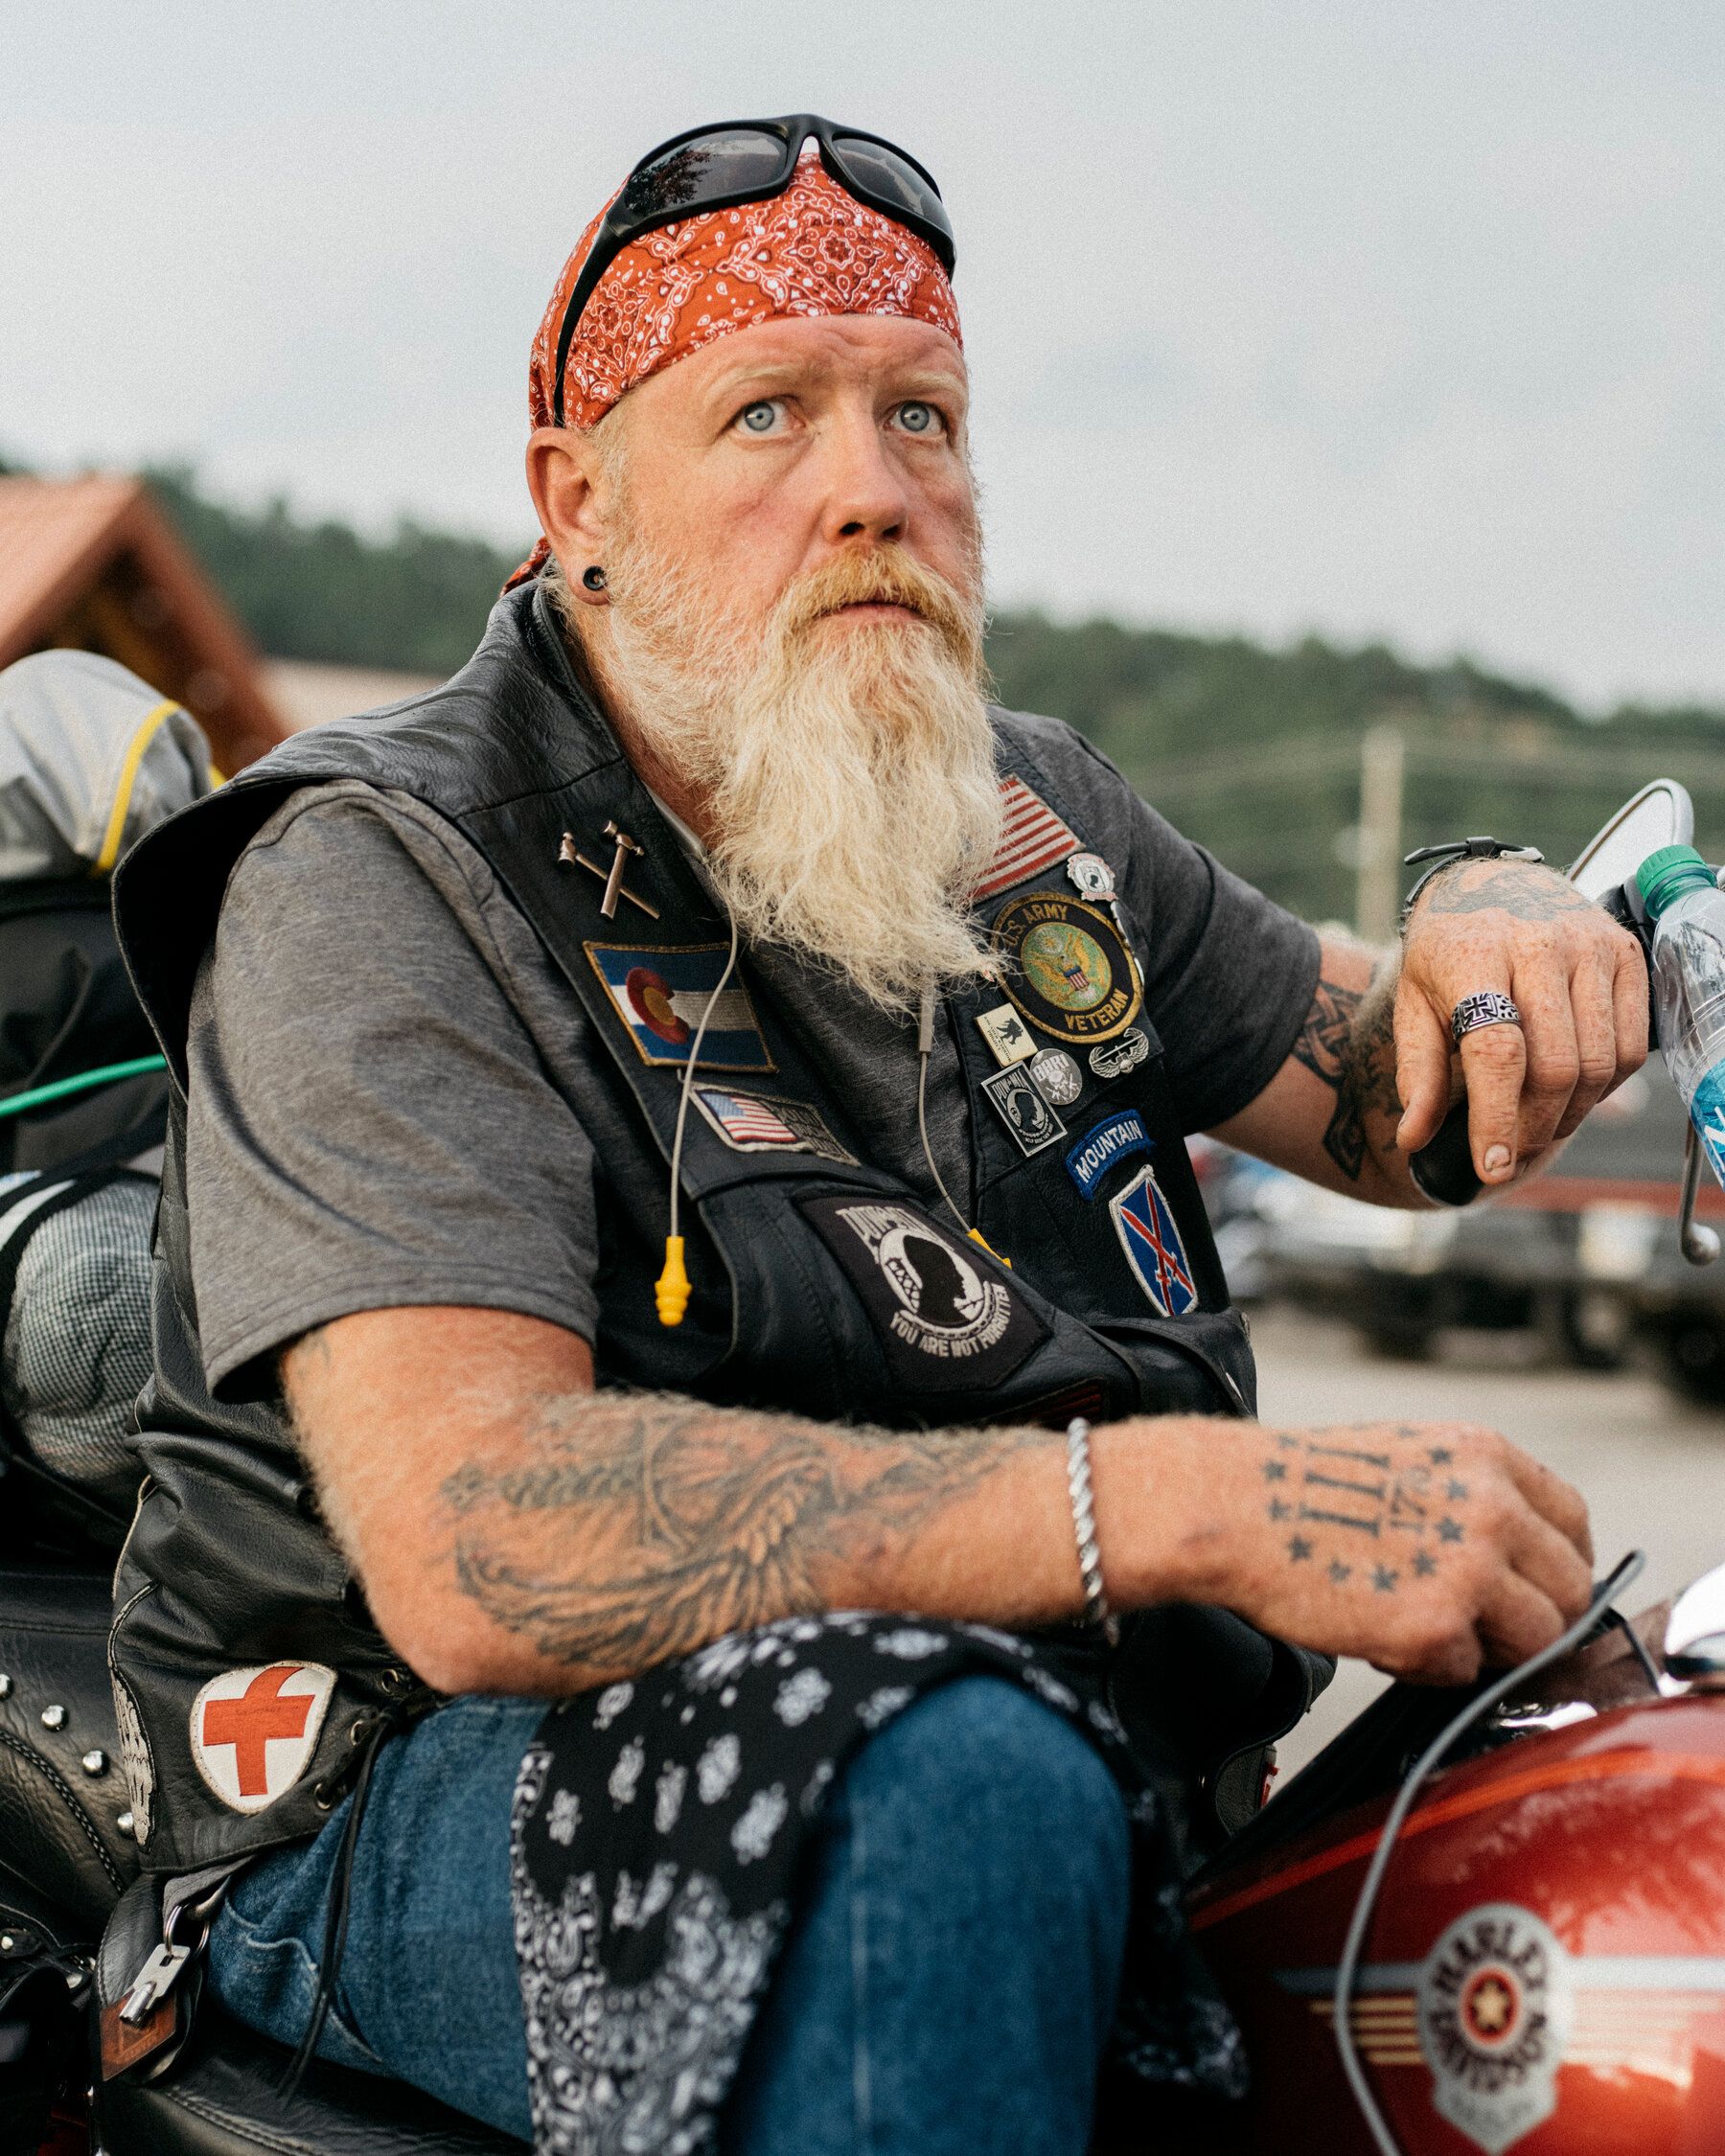 Scenes From the 2020 Sturgis Rally, Undaunted